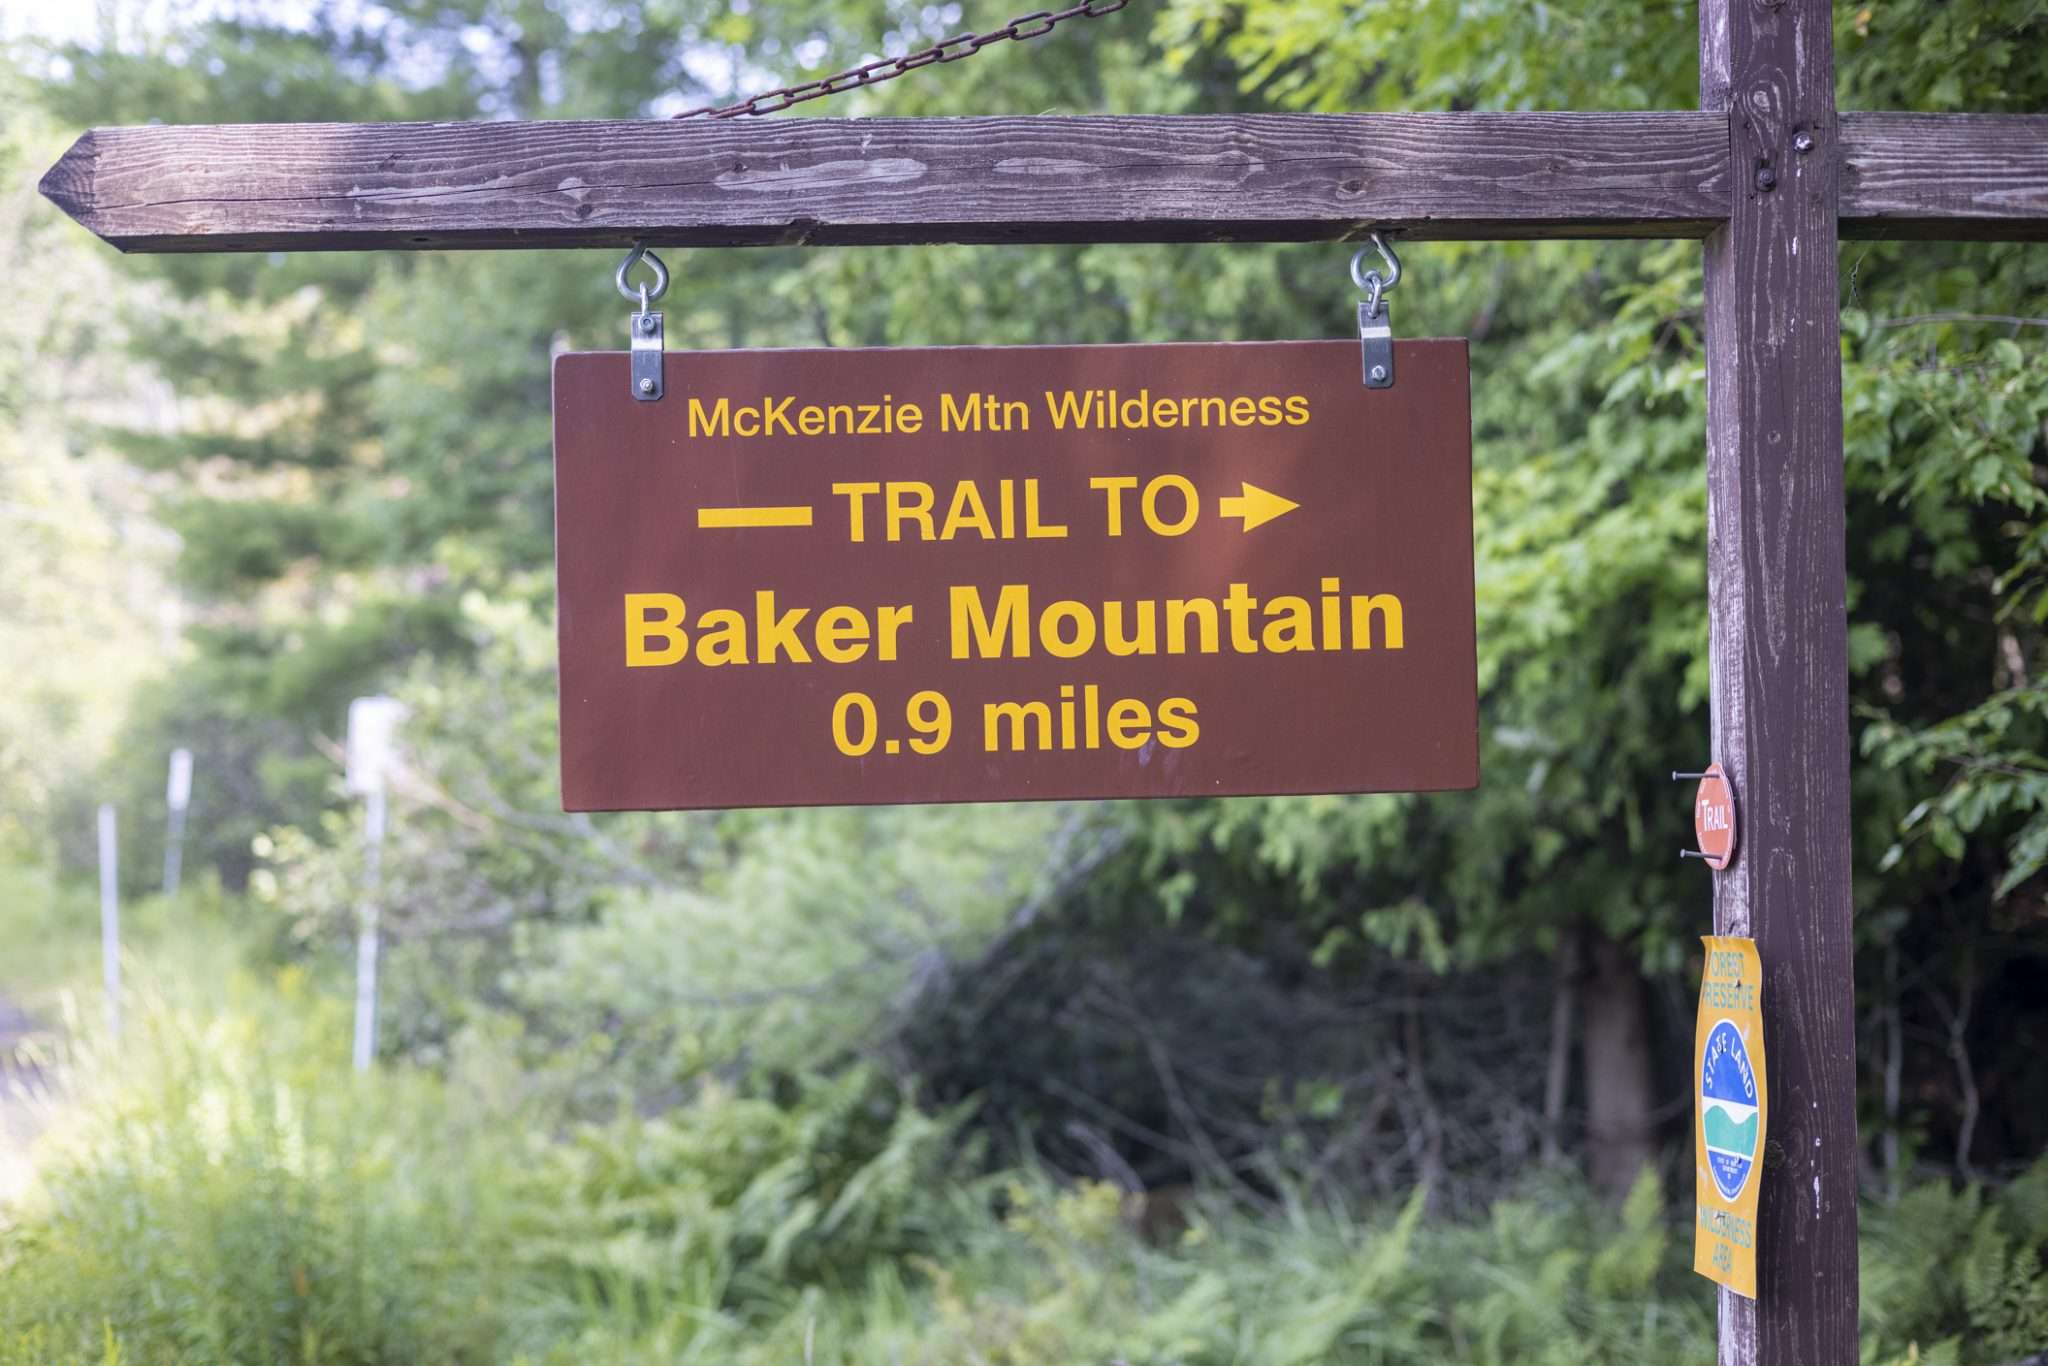 Baker Mountain is a popular mountain because of its views. Photo by Mike Lynch